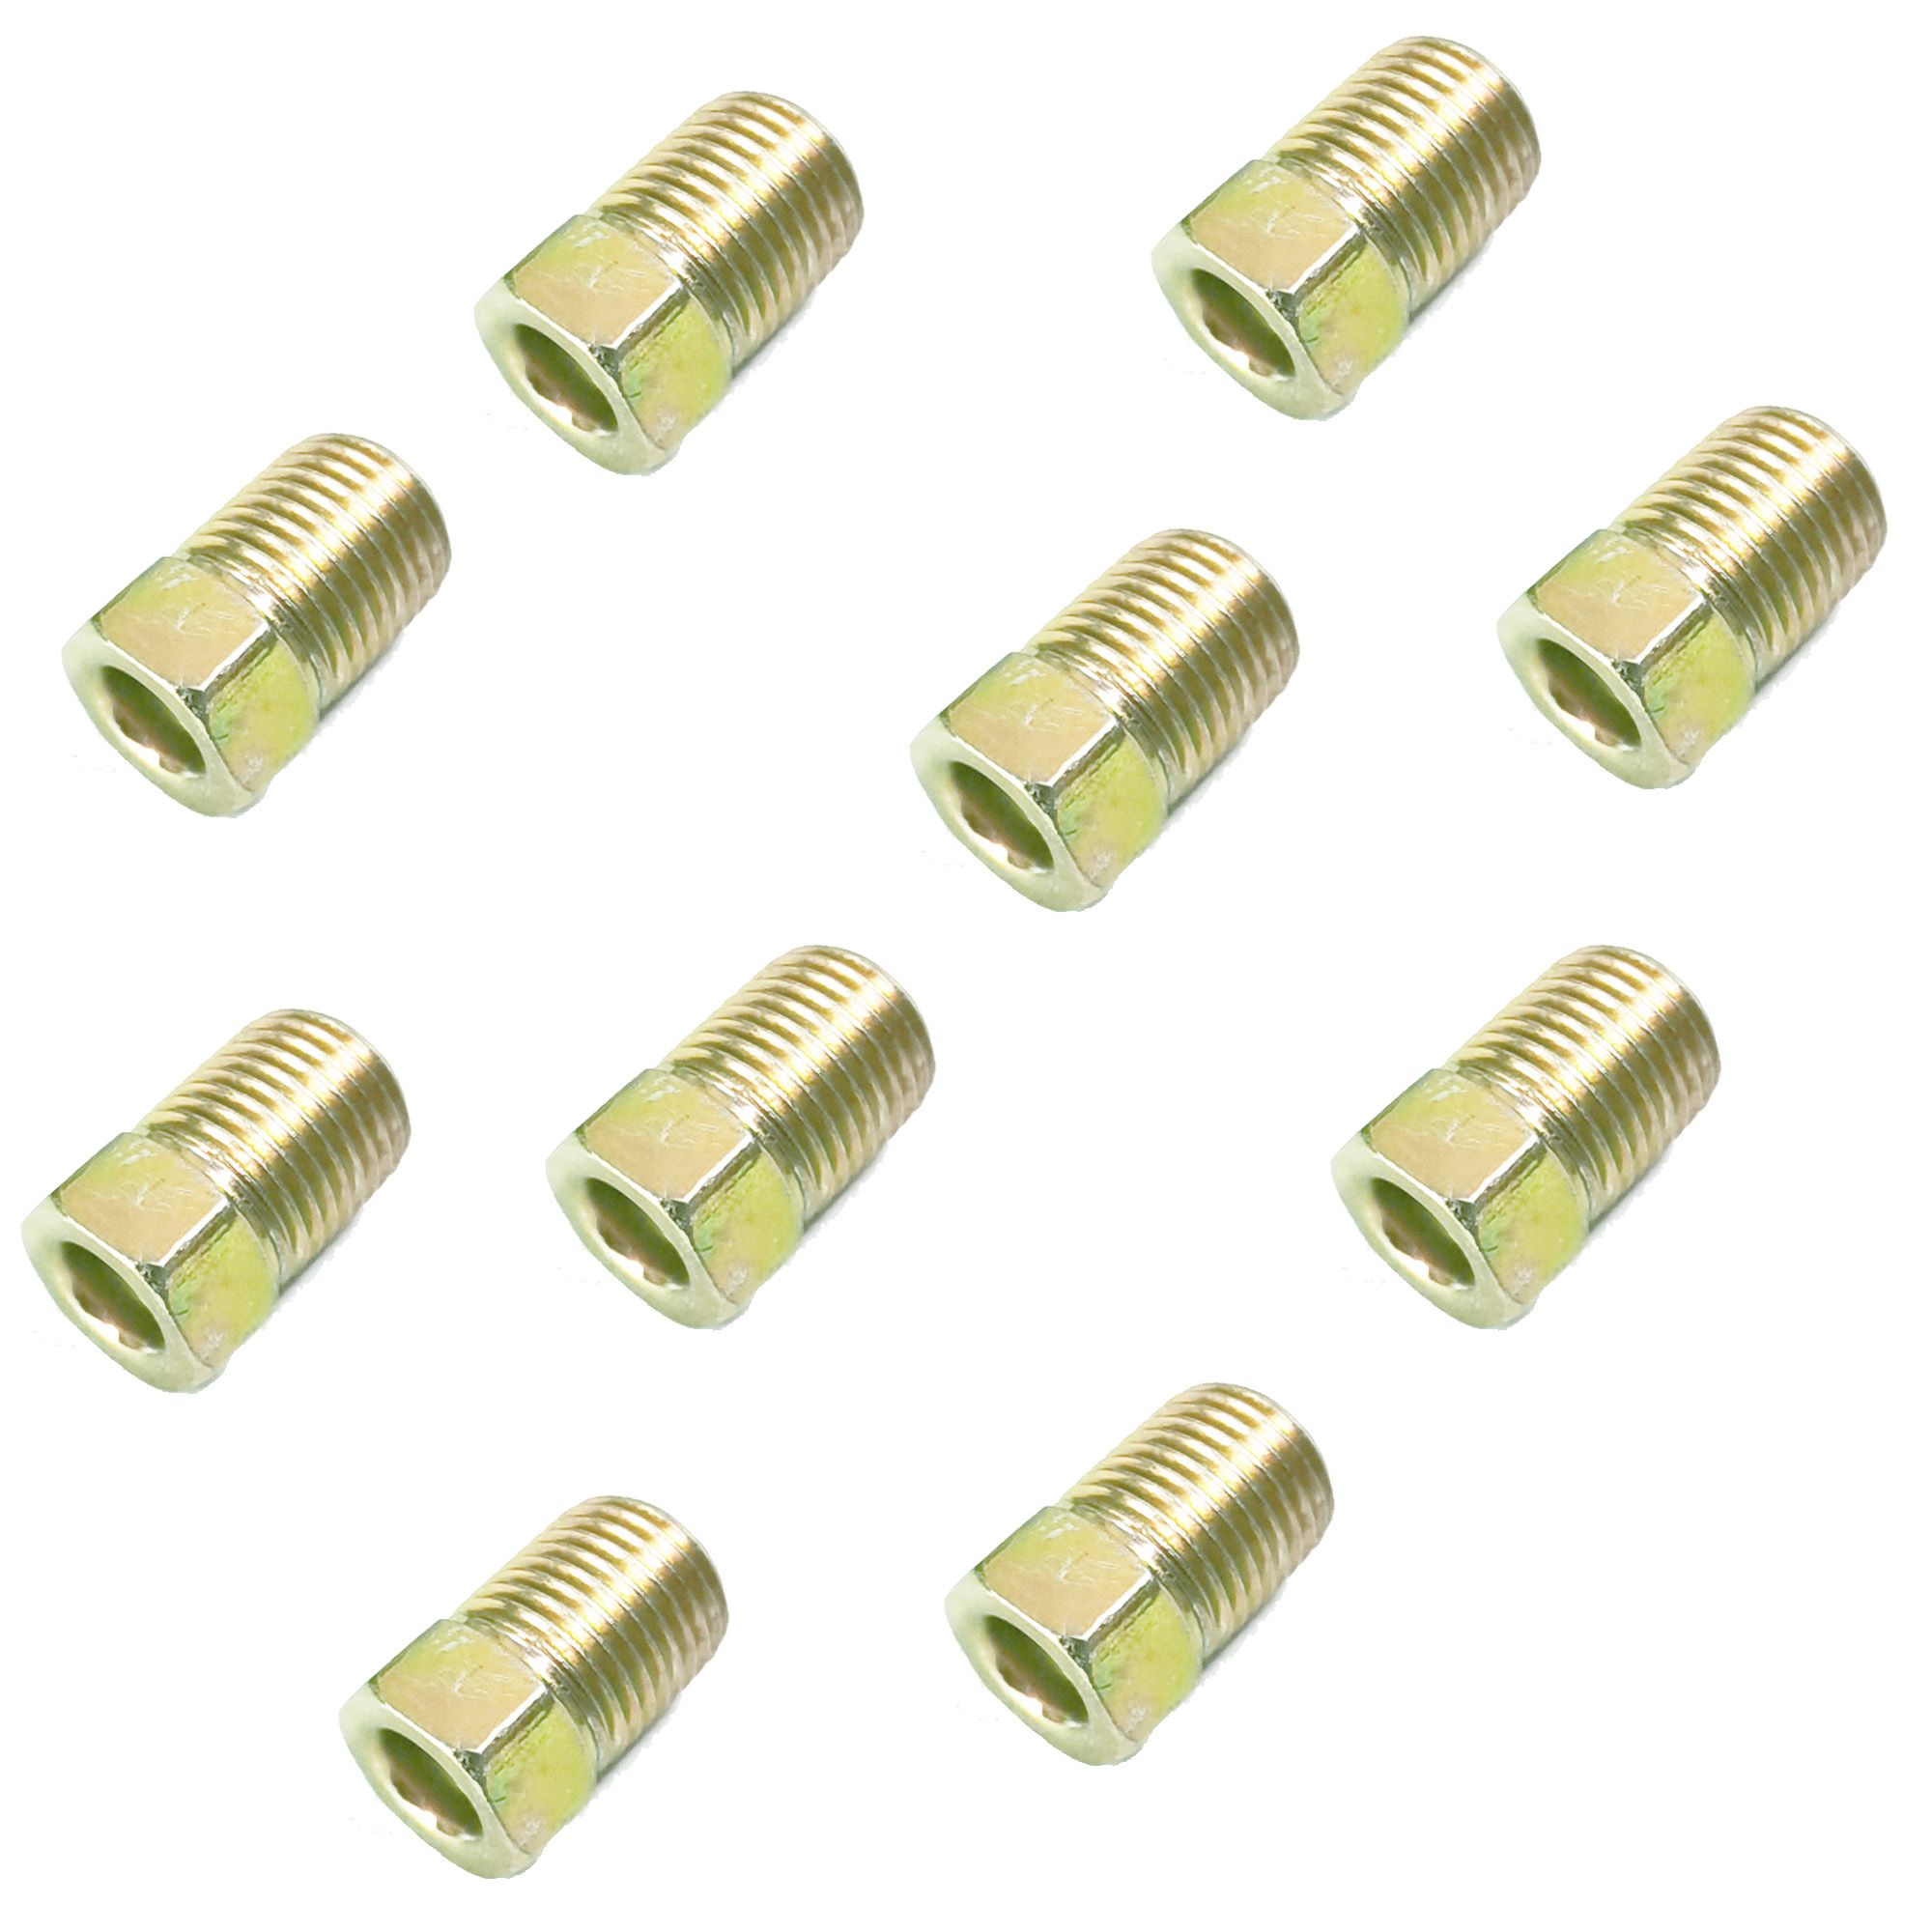 FEMALE NUTS 3/16" CP056 6PCS 10MM x 1MM 2 WAY MALE BRAKE PIPE CONNECTOR